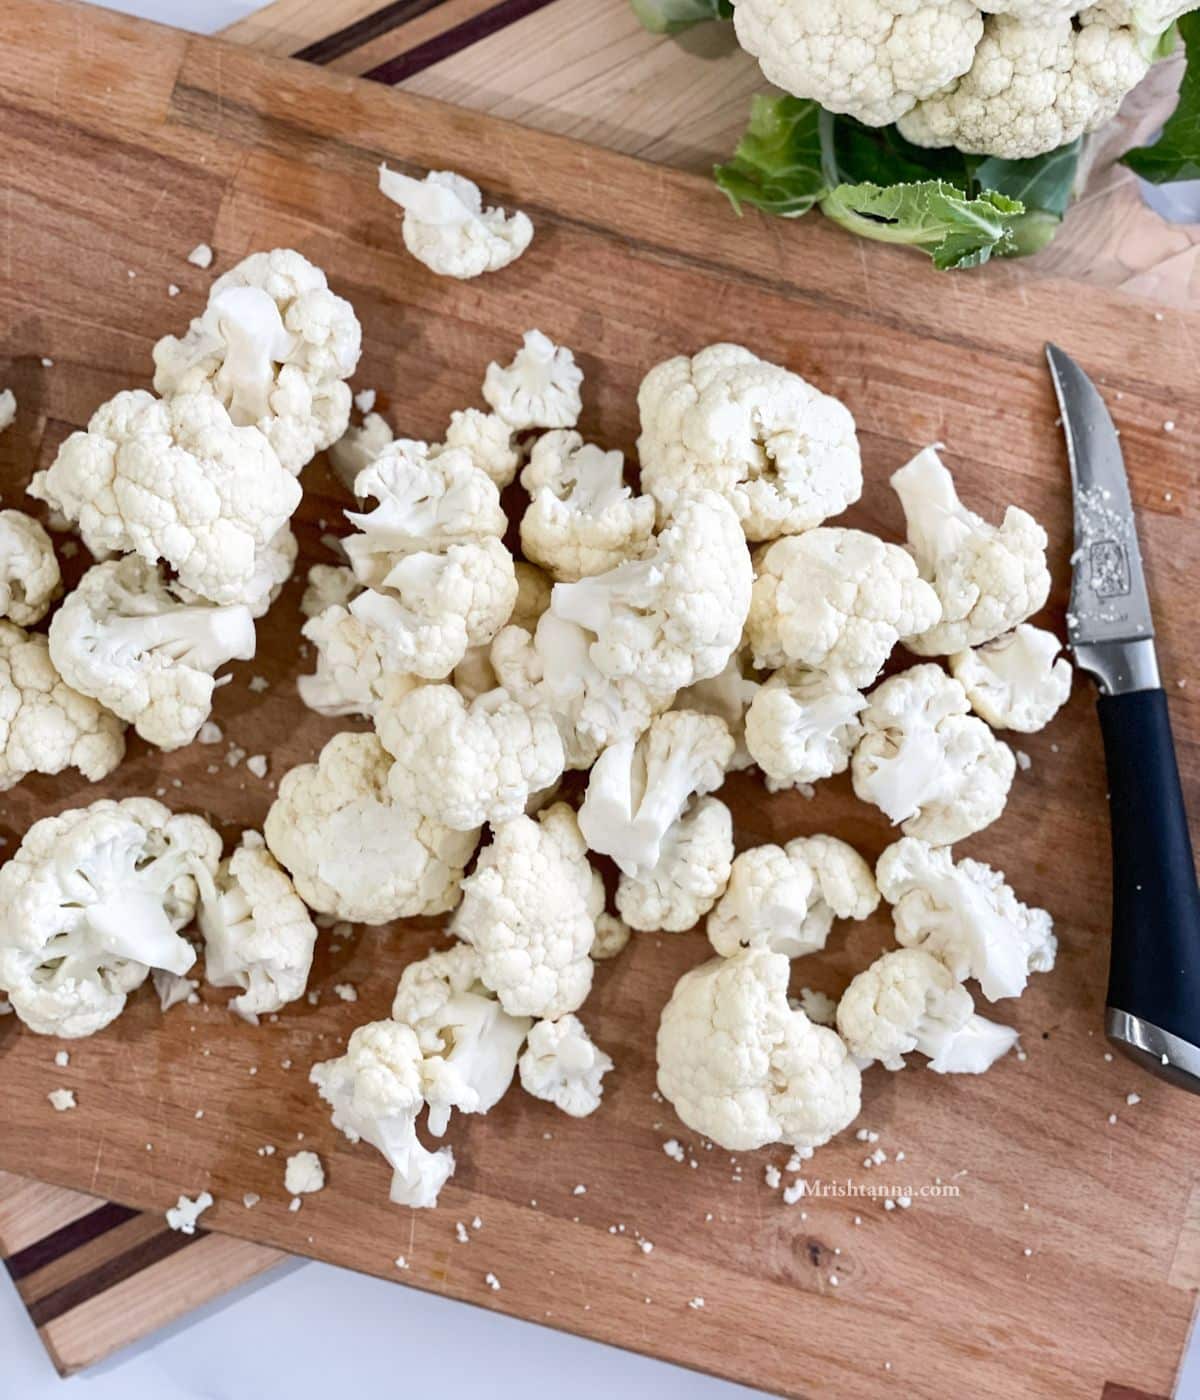 A wooden board is with fresh cauliflower florets and a knife by the side.